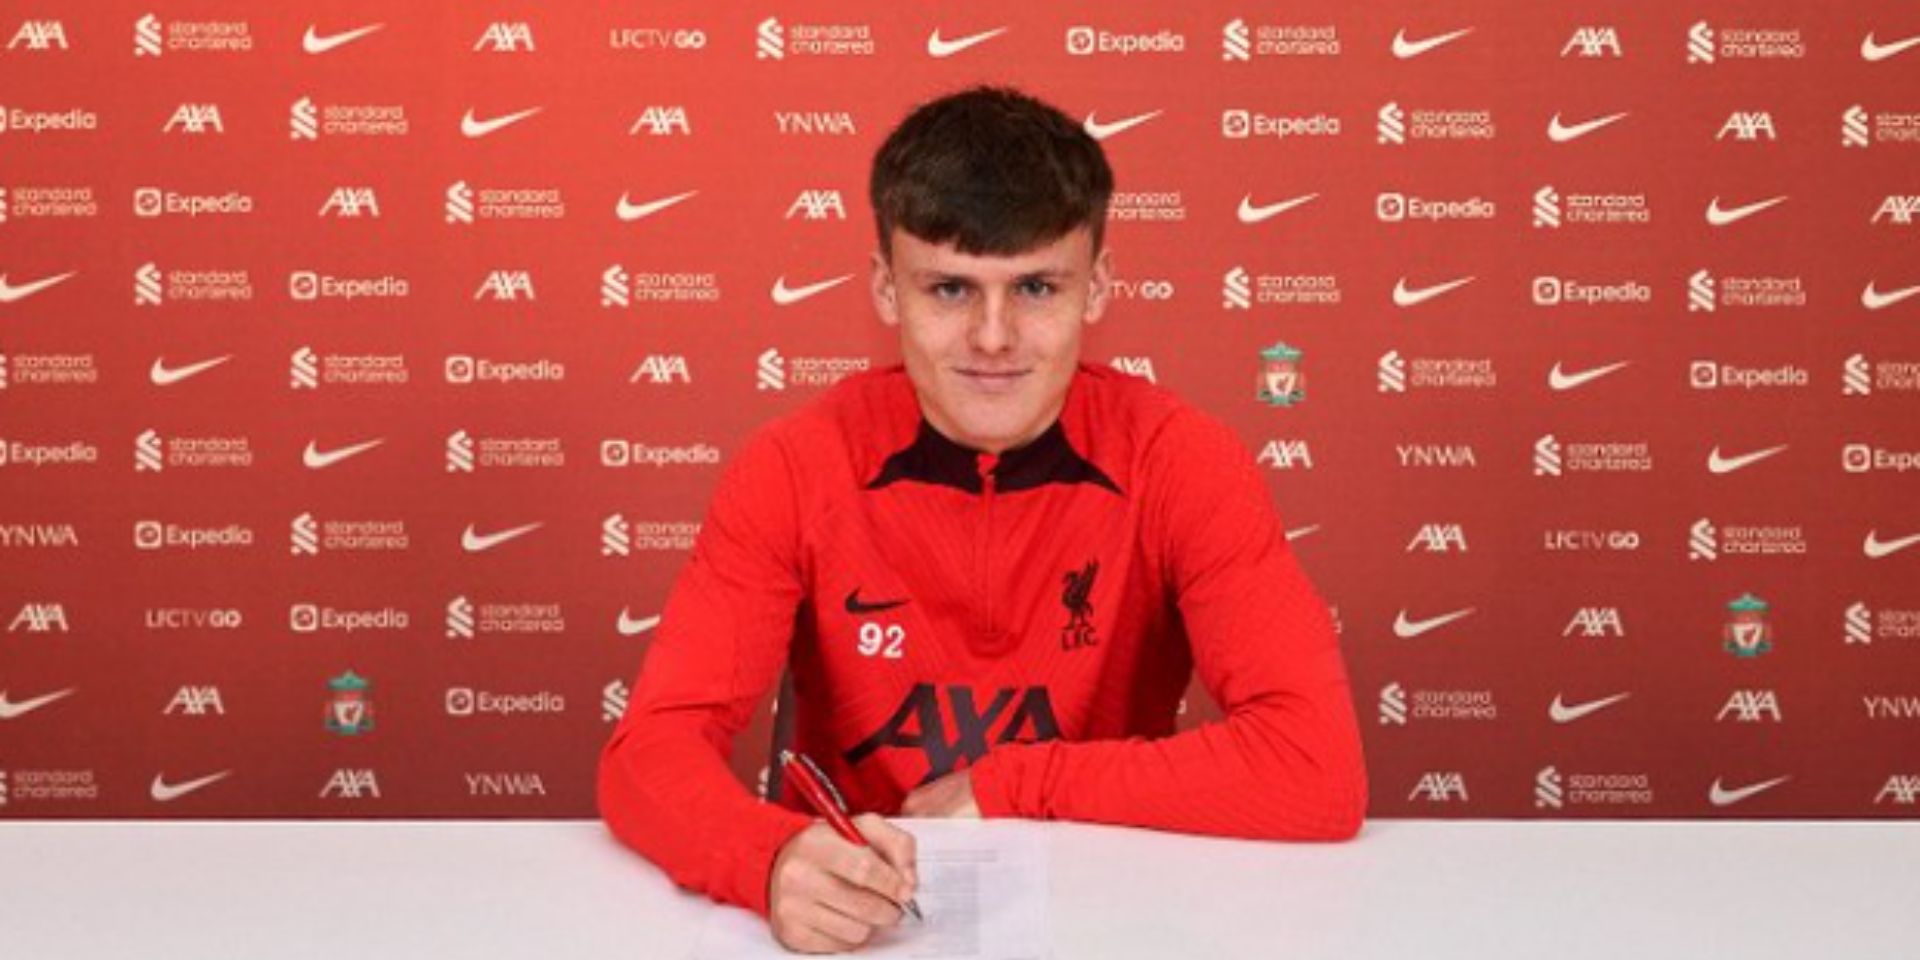 Ben Doak’s Mum shares her pride as the young Scot sings his first pro contract with Liverpool